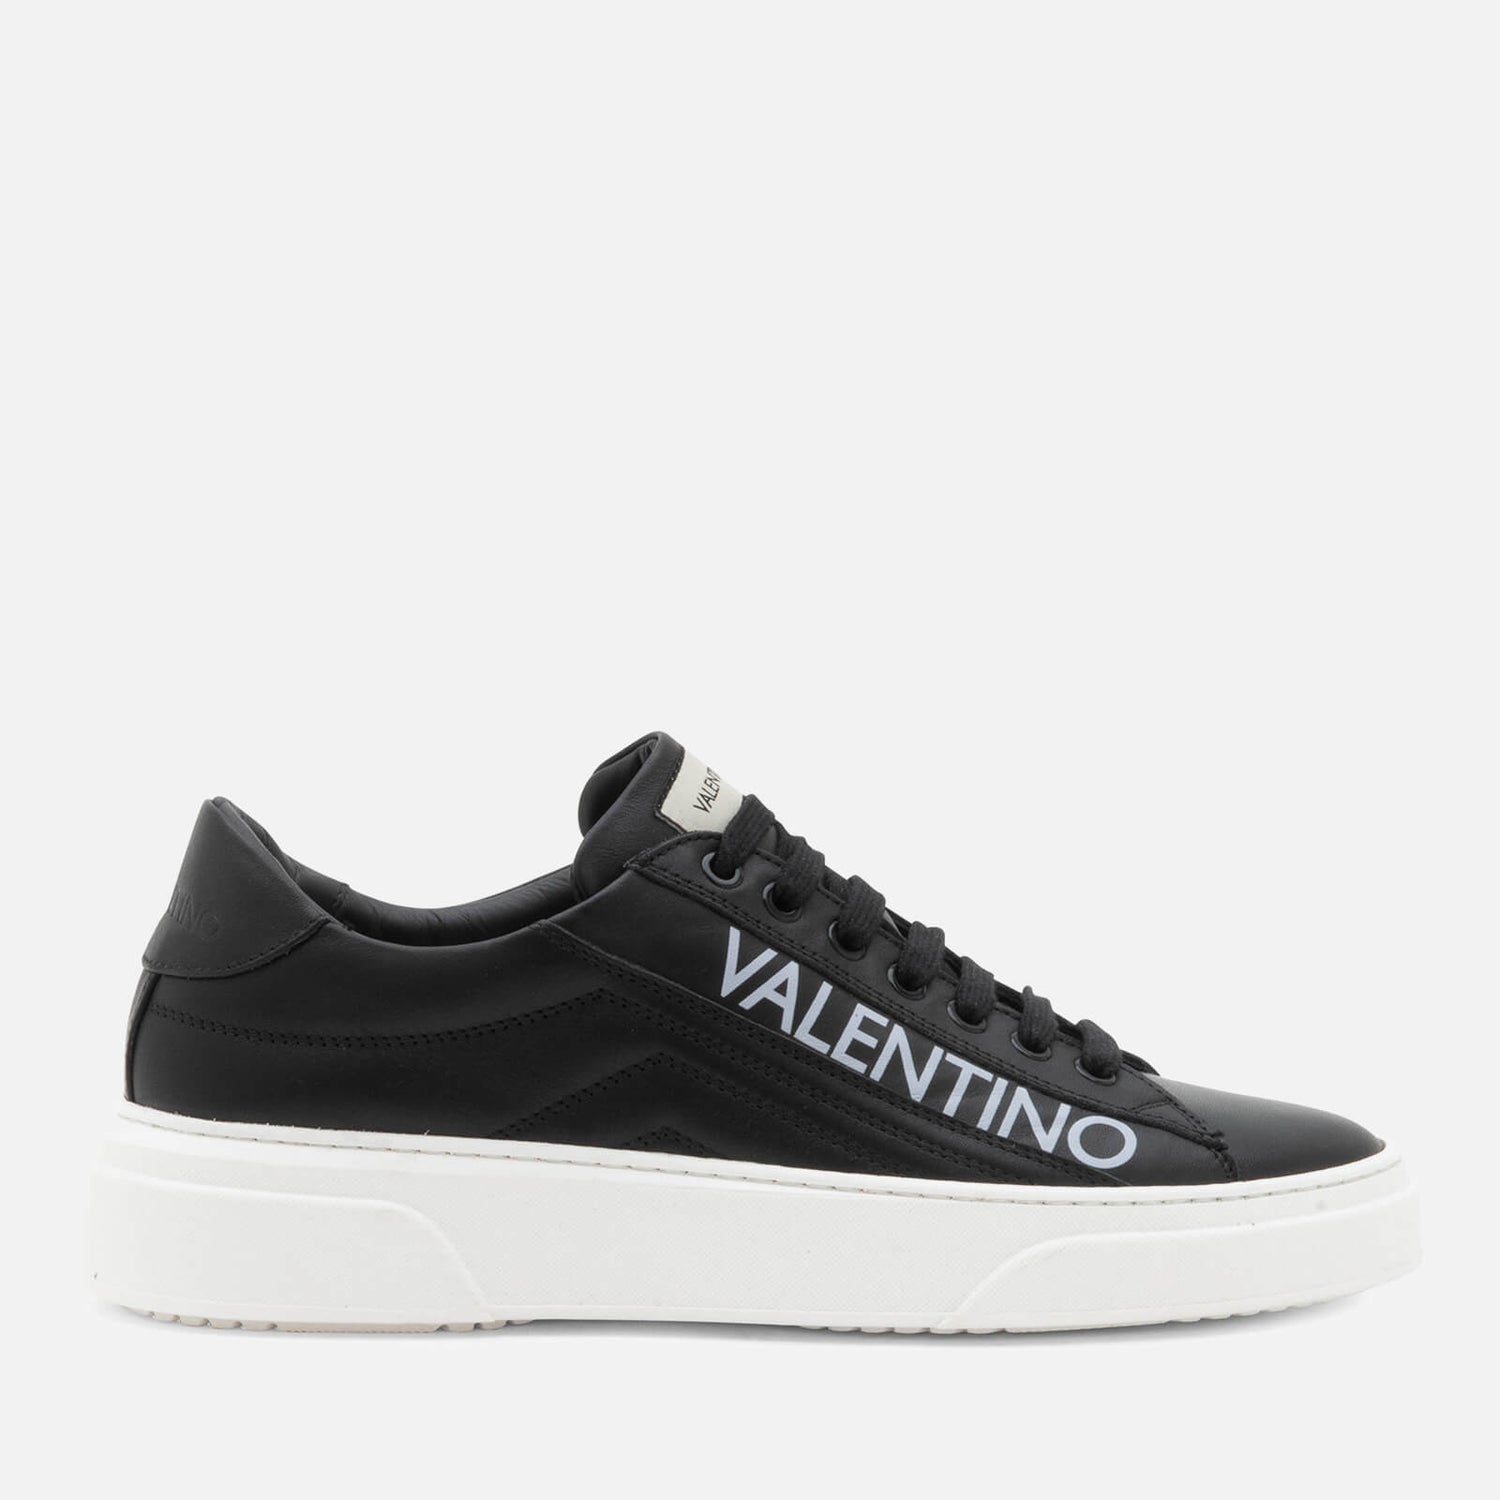 Valentino Men's Stan S Leather Trainers - UK 7